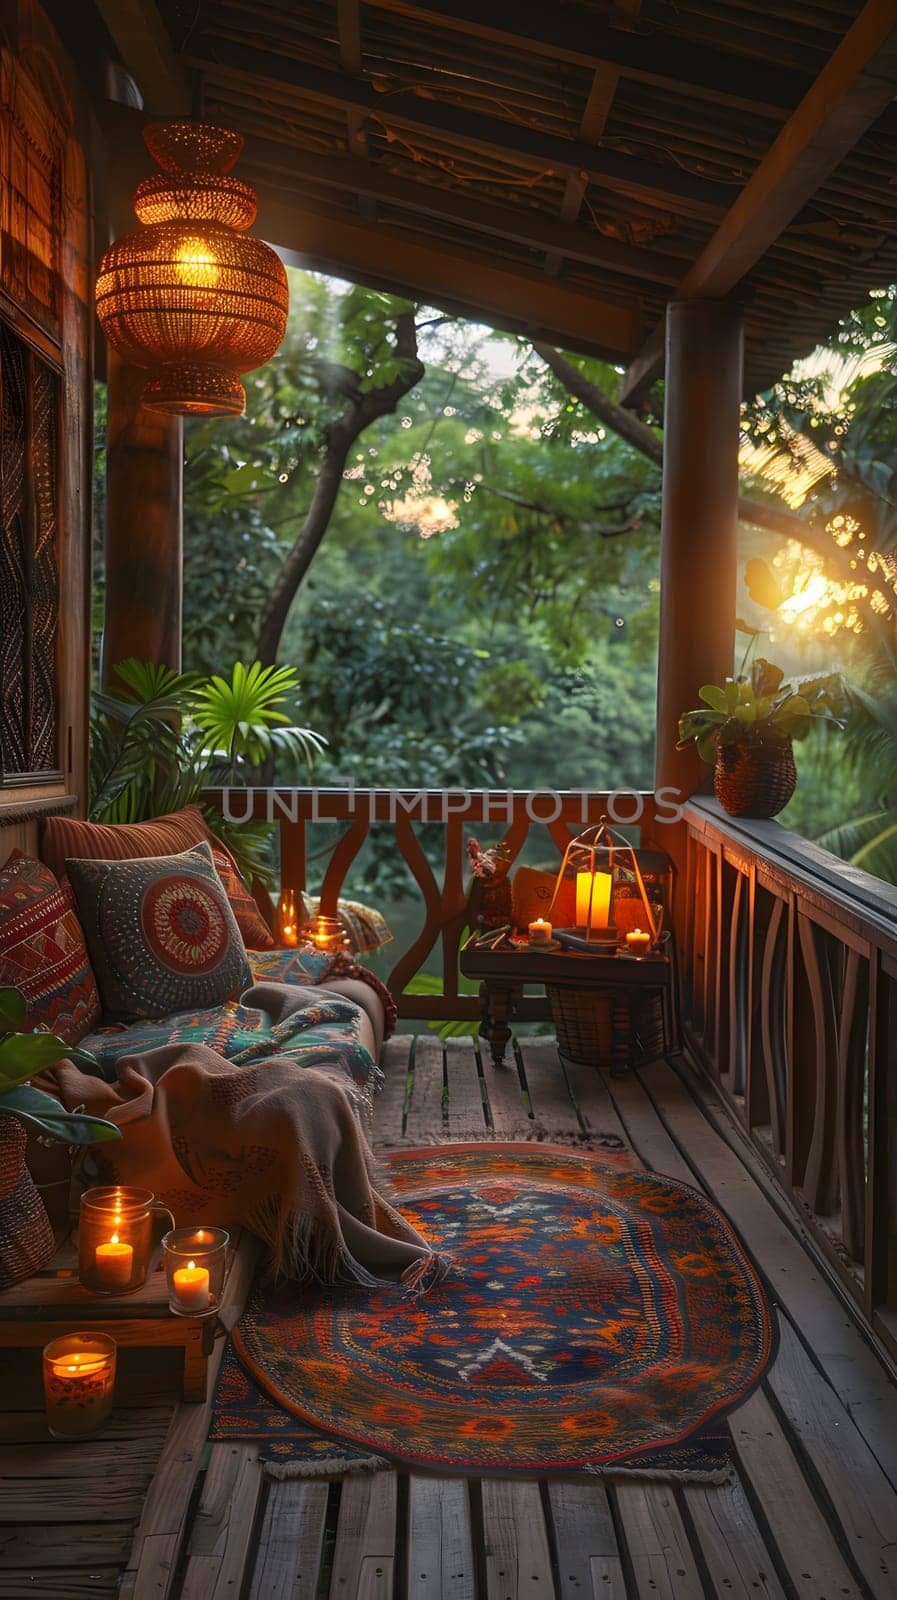 A cozy wooden porch featuring a couch, rug, lanterns, and candles, creating a relaxing outdoor space perfect for leisure and enjoying natural landscapes